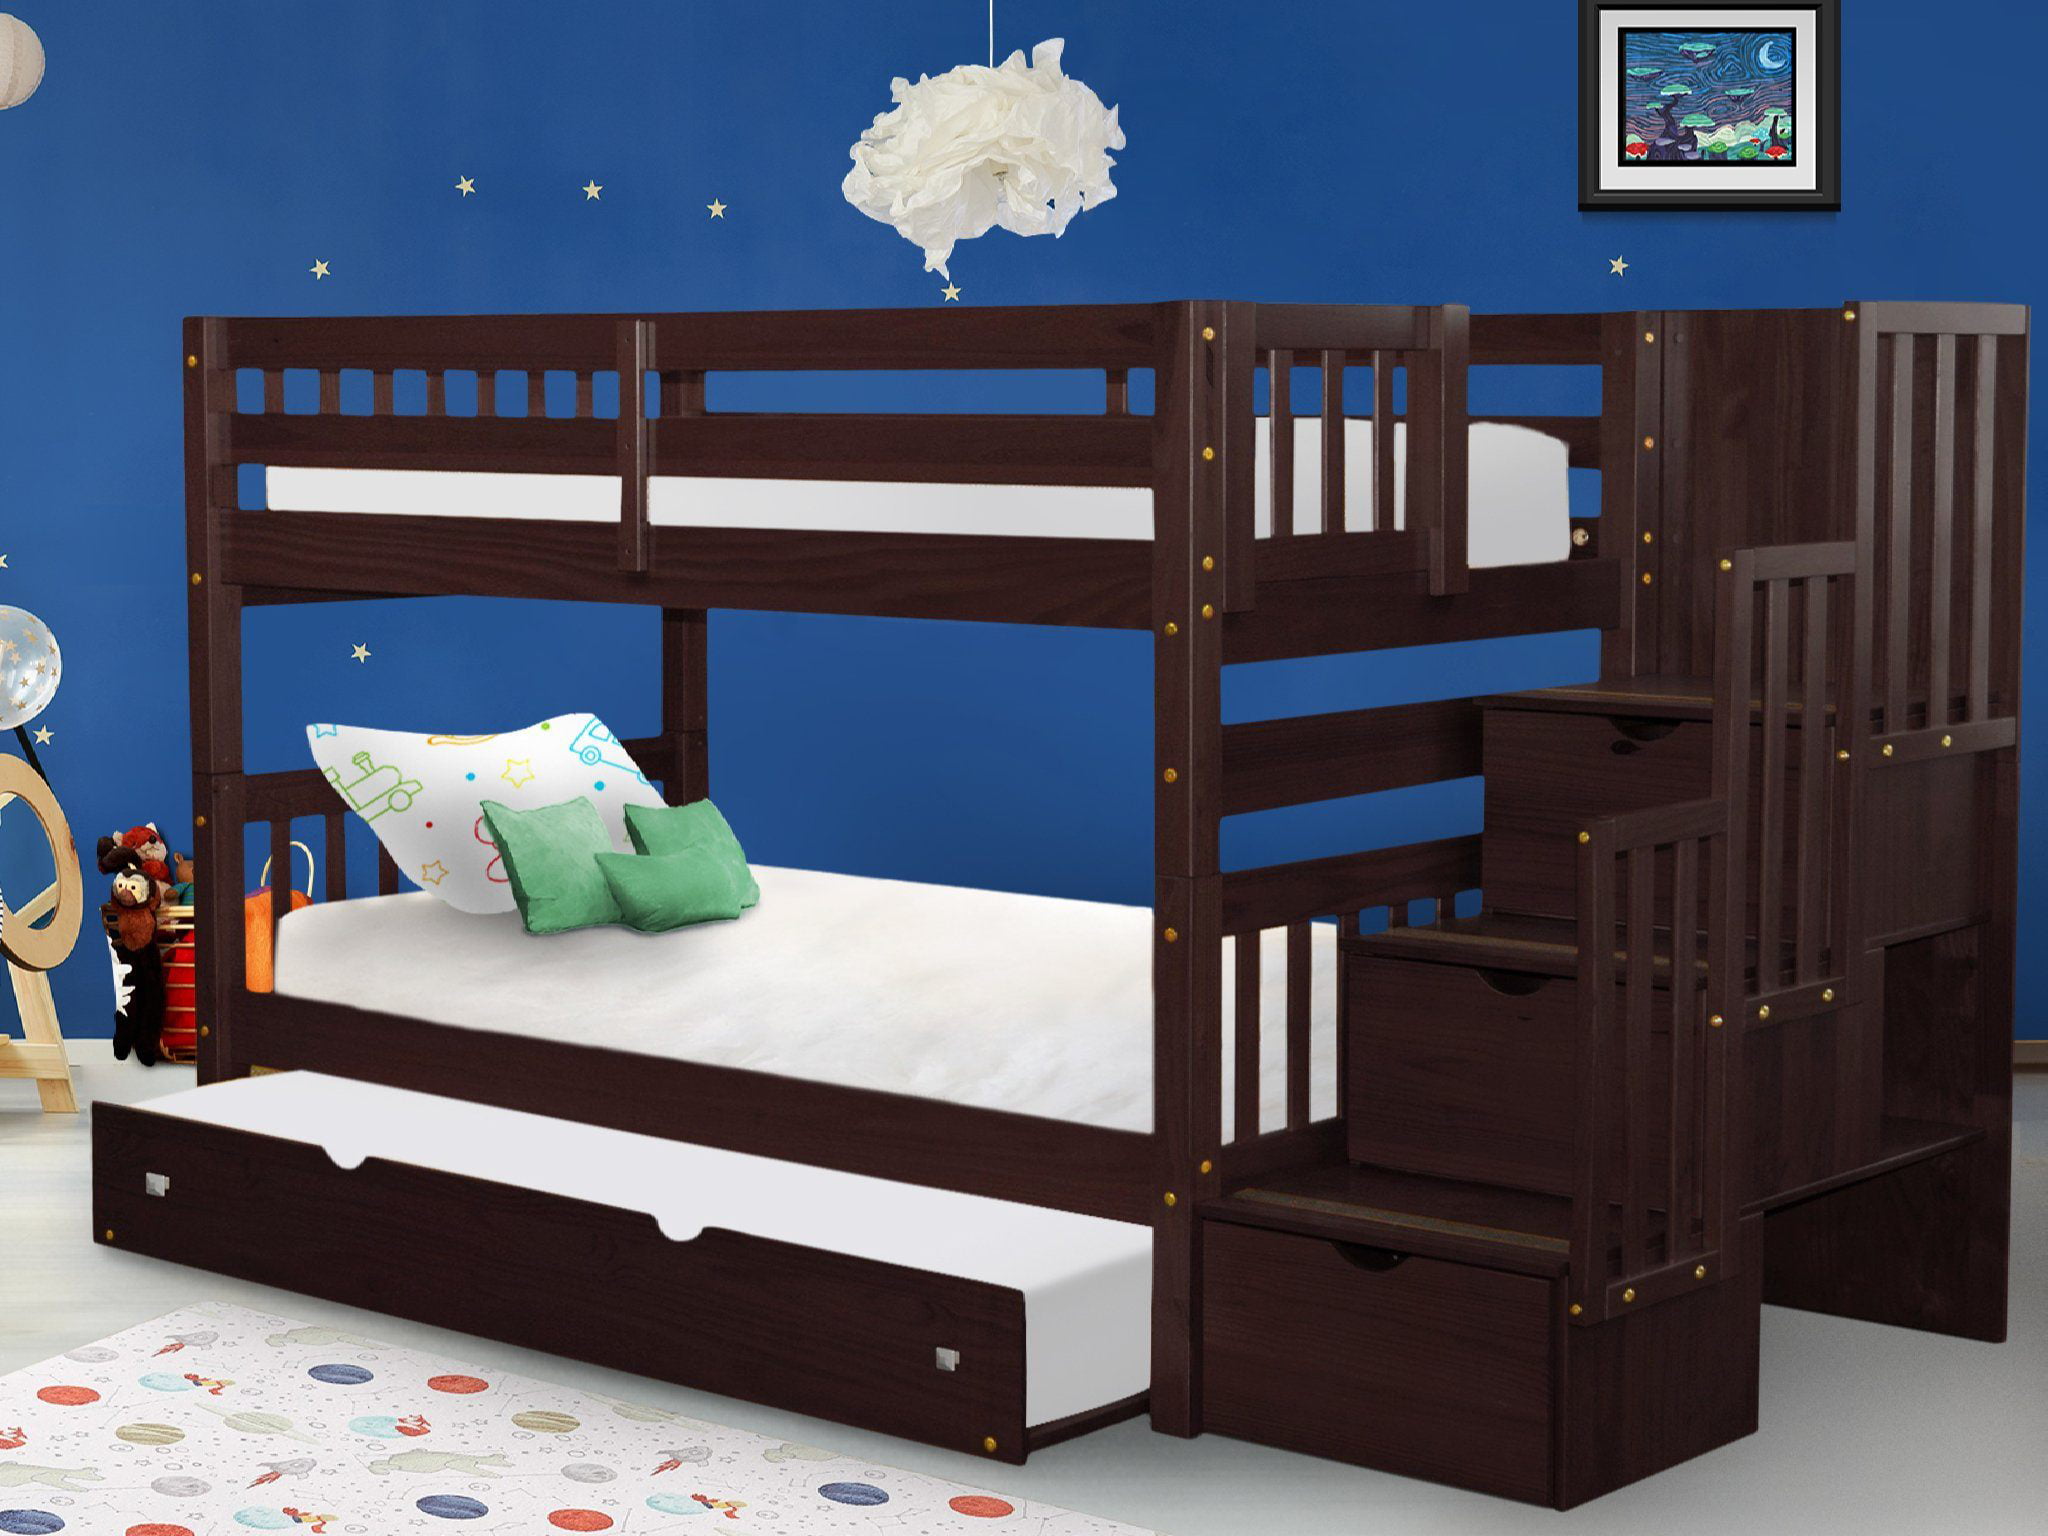 Bedz King Stairway Bunk Beds Twin Over, Twin Bunk Bed With Trundle And Storage